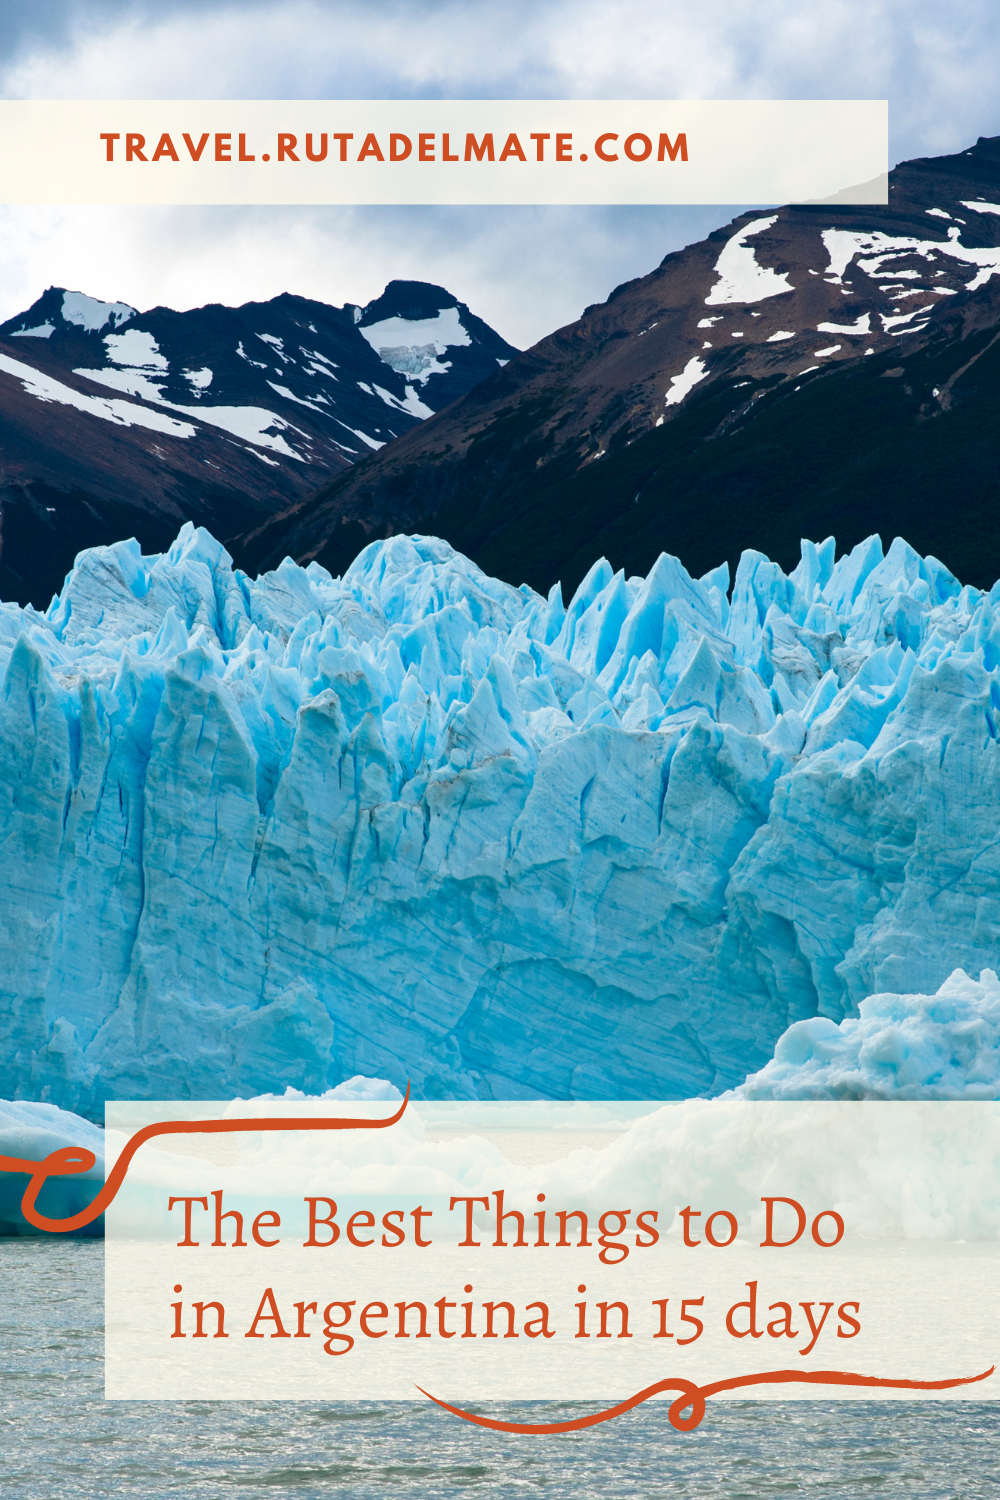 Best things to do in Argentina in 15 days